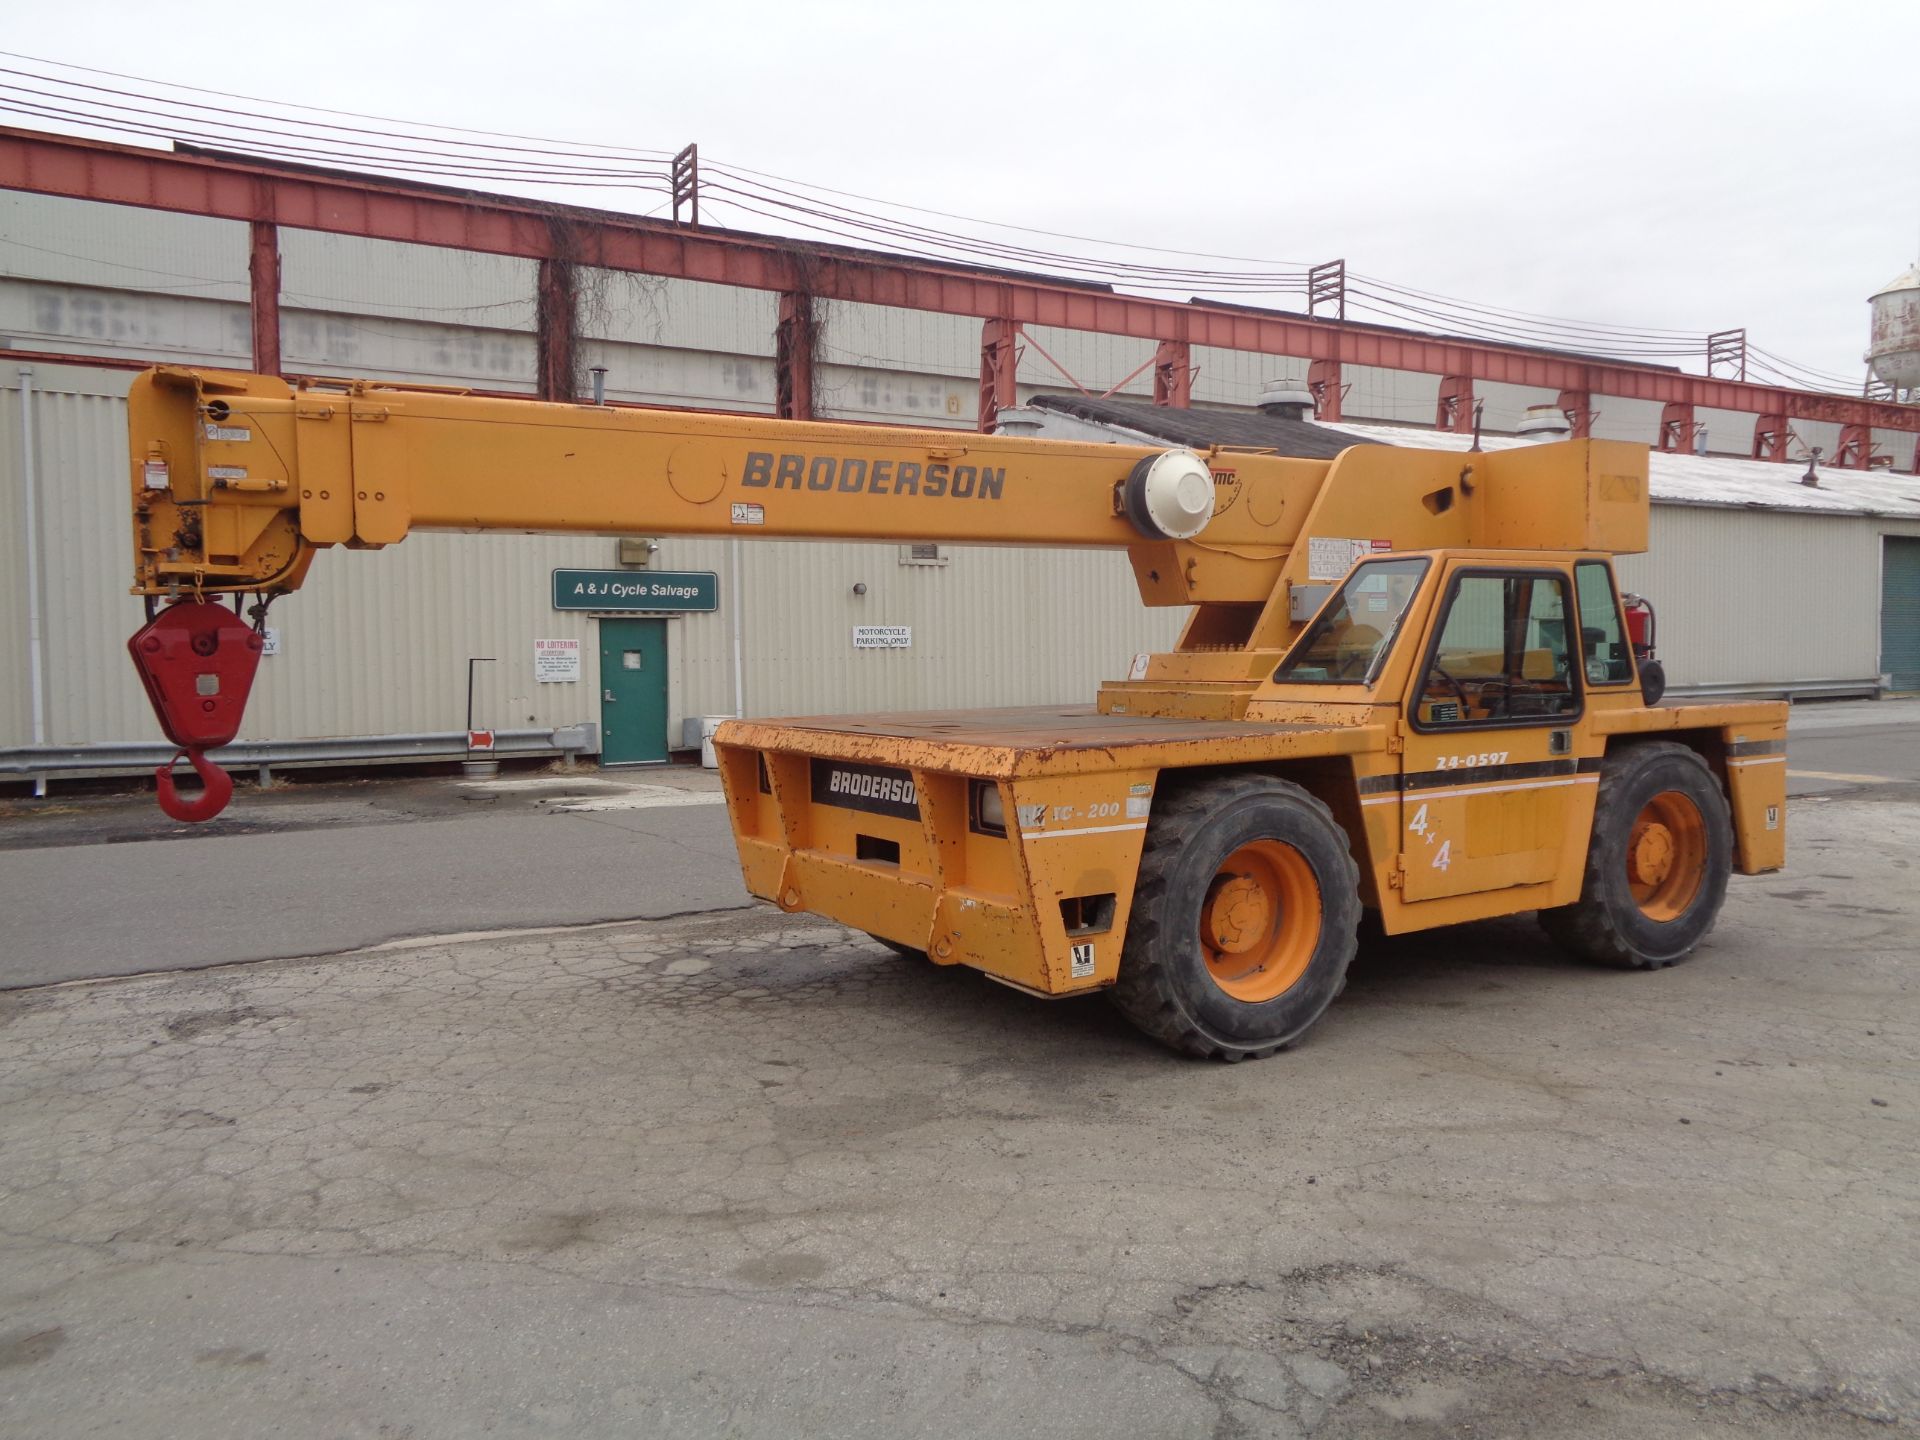 2005 Broderson IC200 2F 30,000lb Carry Deck Crane - Image 2 of 21